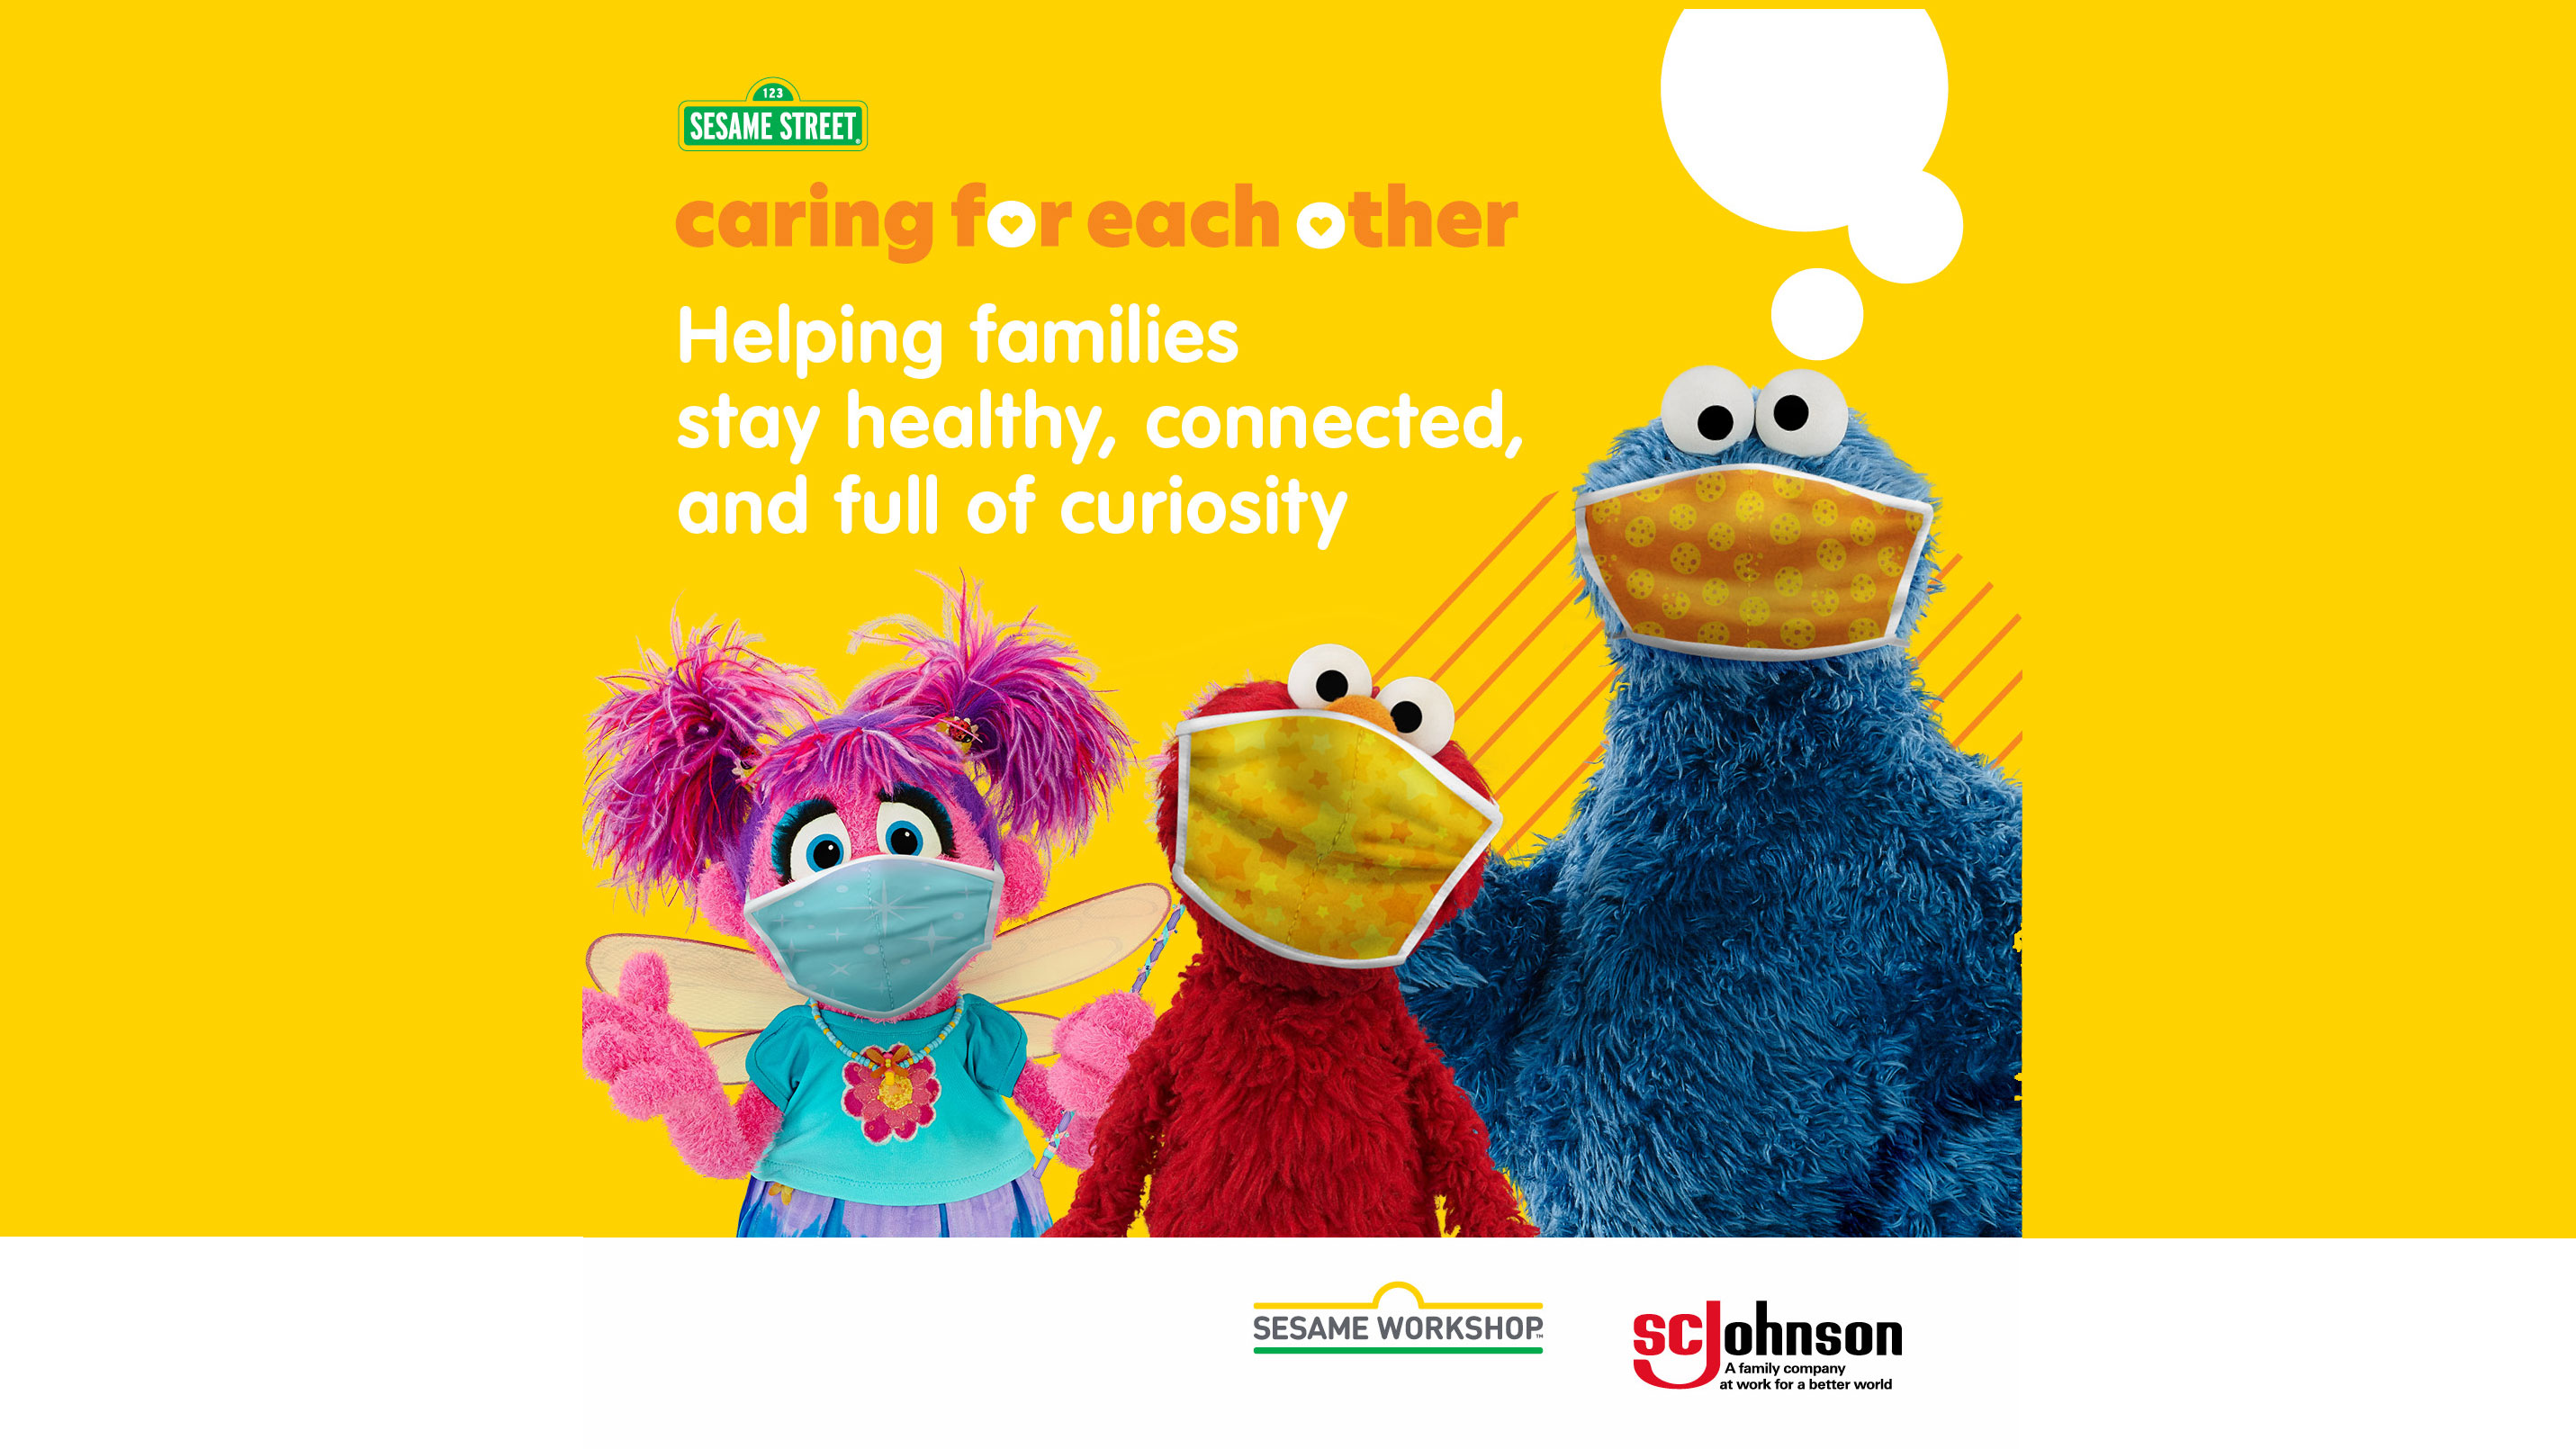 Sesame Workshop Caring For Each Other initiative